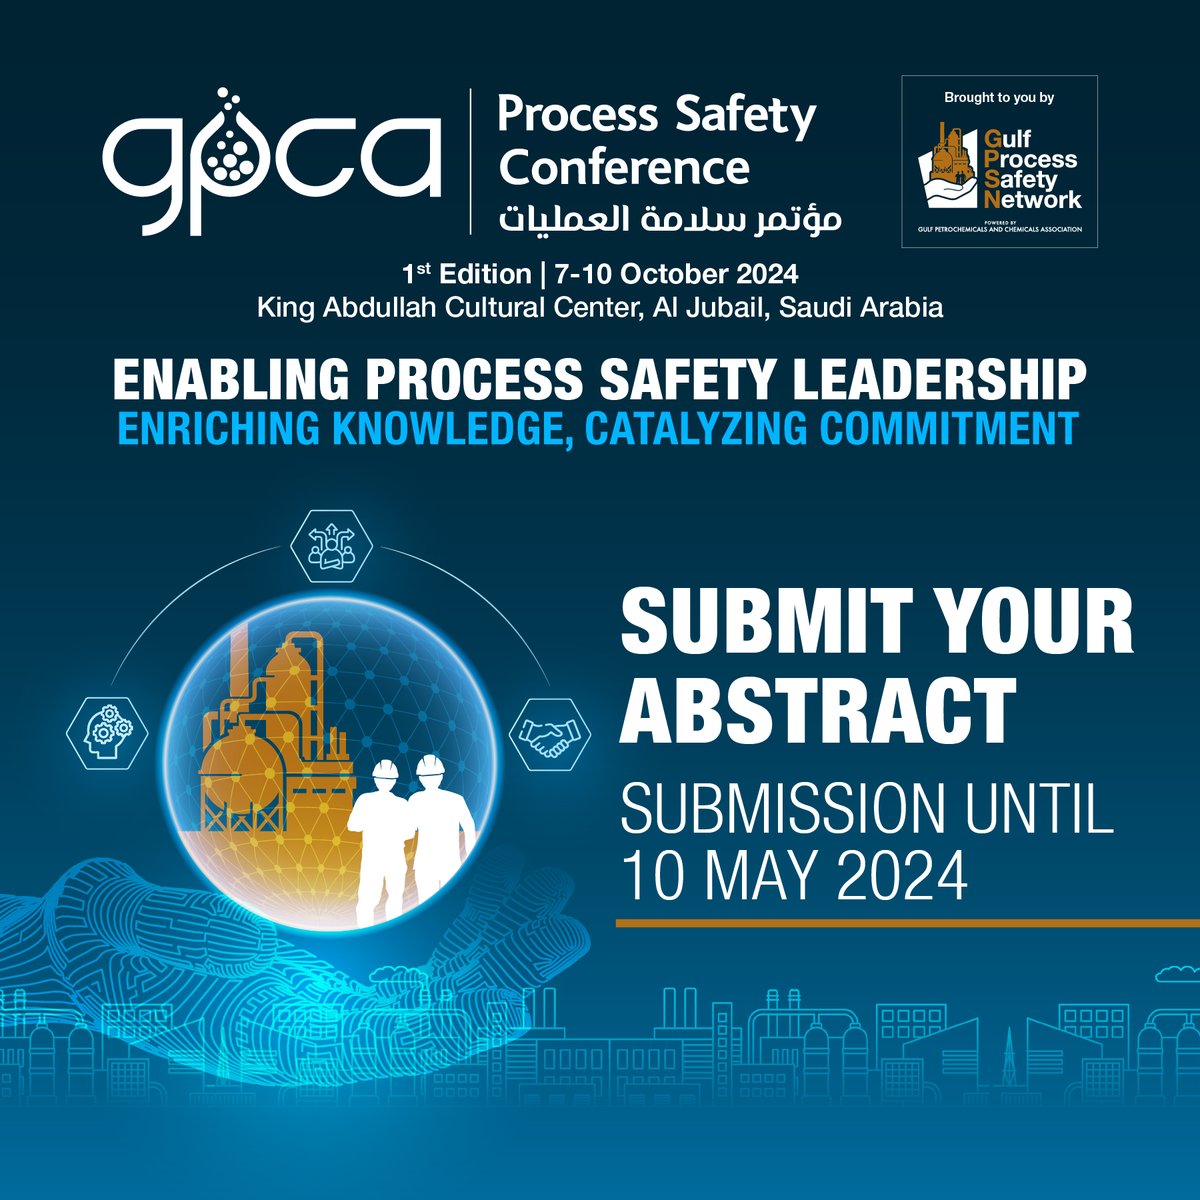 5 Days Left to Submit Your Abstract!
Be part of the inaugural edition of the GPCA Process Safety Conference, taking place from 7-10 October in Saudi Arabia. Submit your abstract here gpca.org.ae/1st-gpca-proce… 
#GPCAEvents #ResponsibleCare #EHSS #GPSN